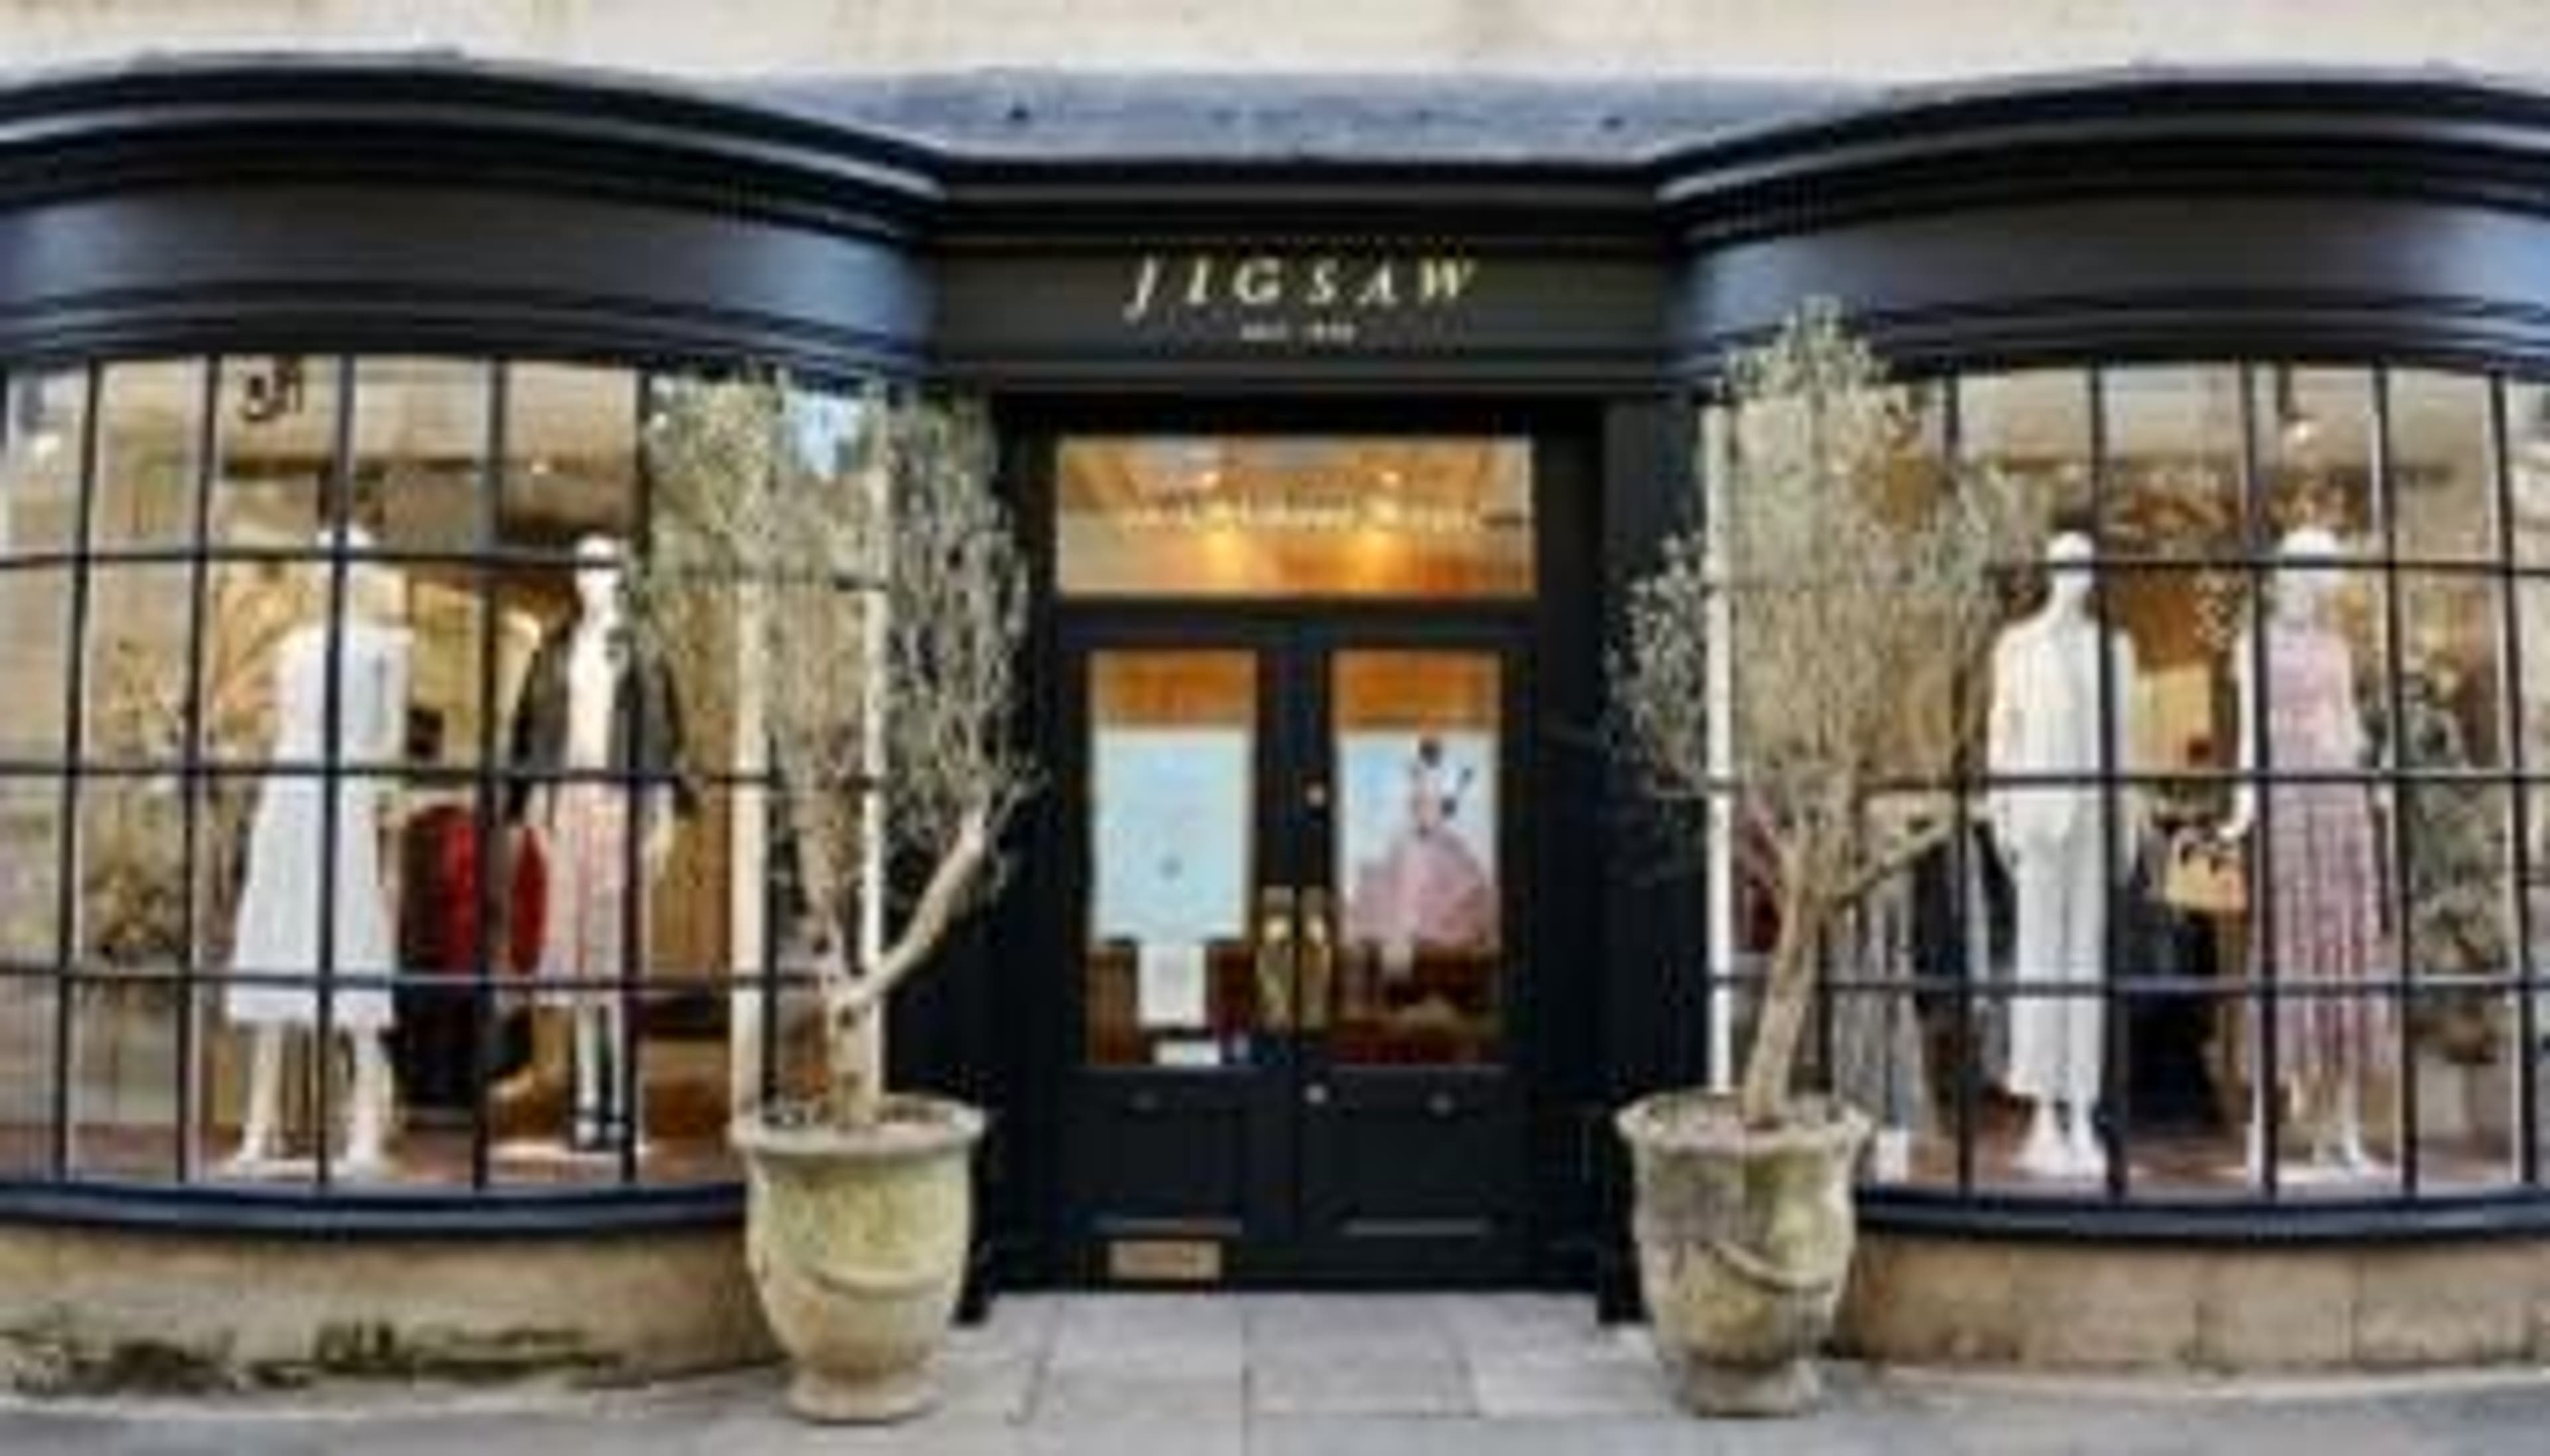  A Jigsaw store where you can book a Personal Shopping appointment 